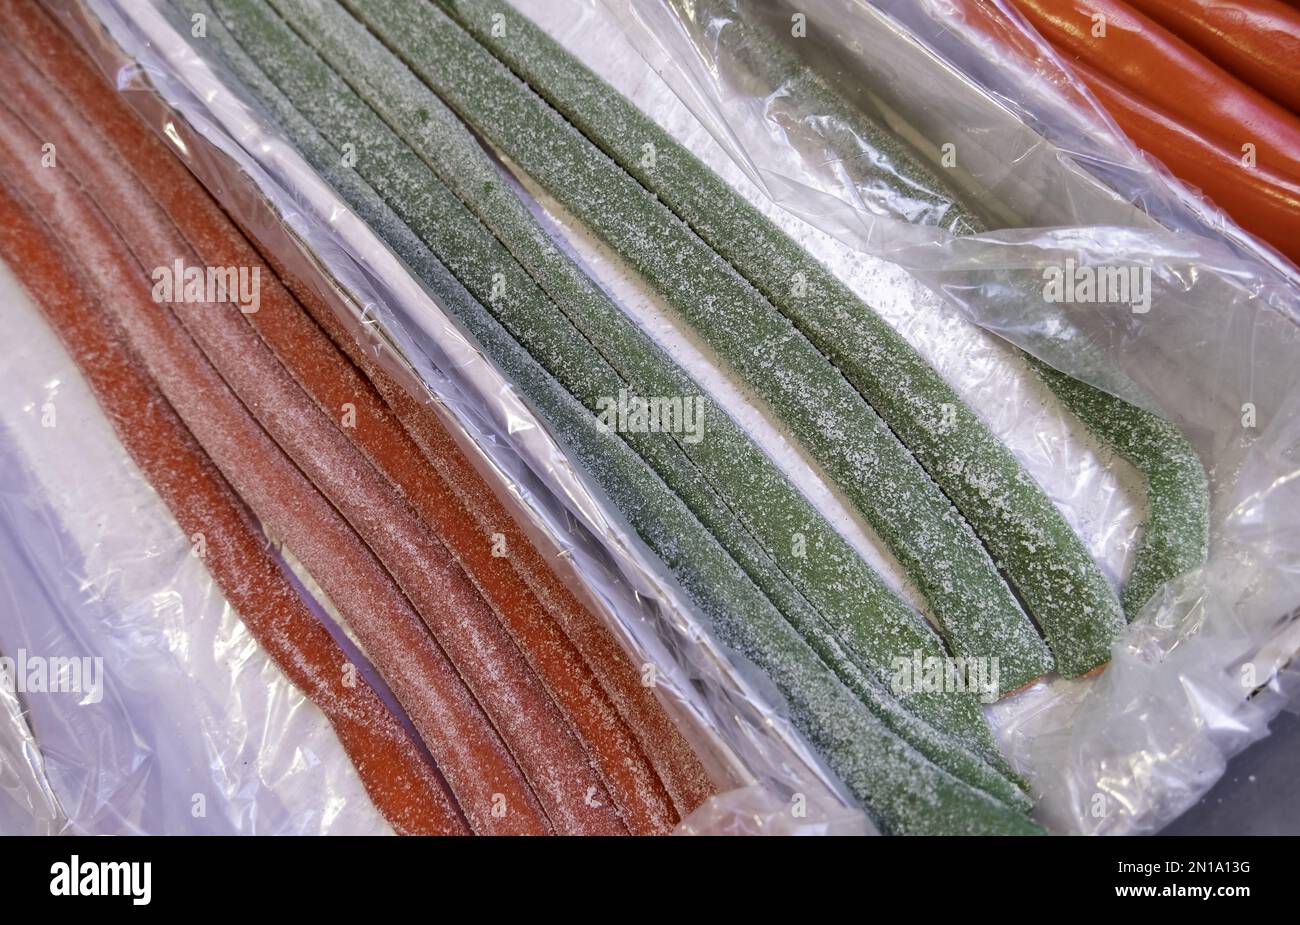 Detail of traditional sweets in an old market, unhealthy food Stock Photo